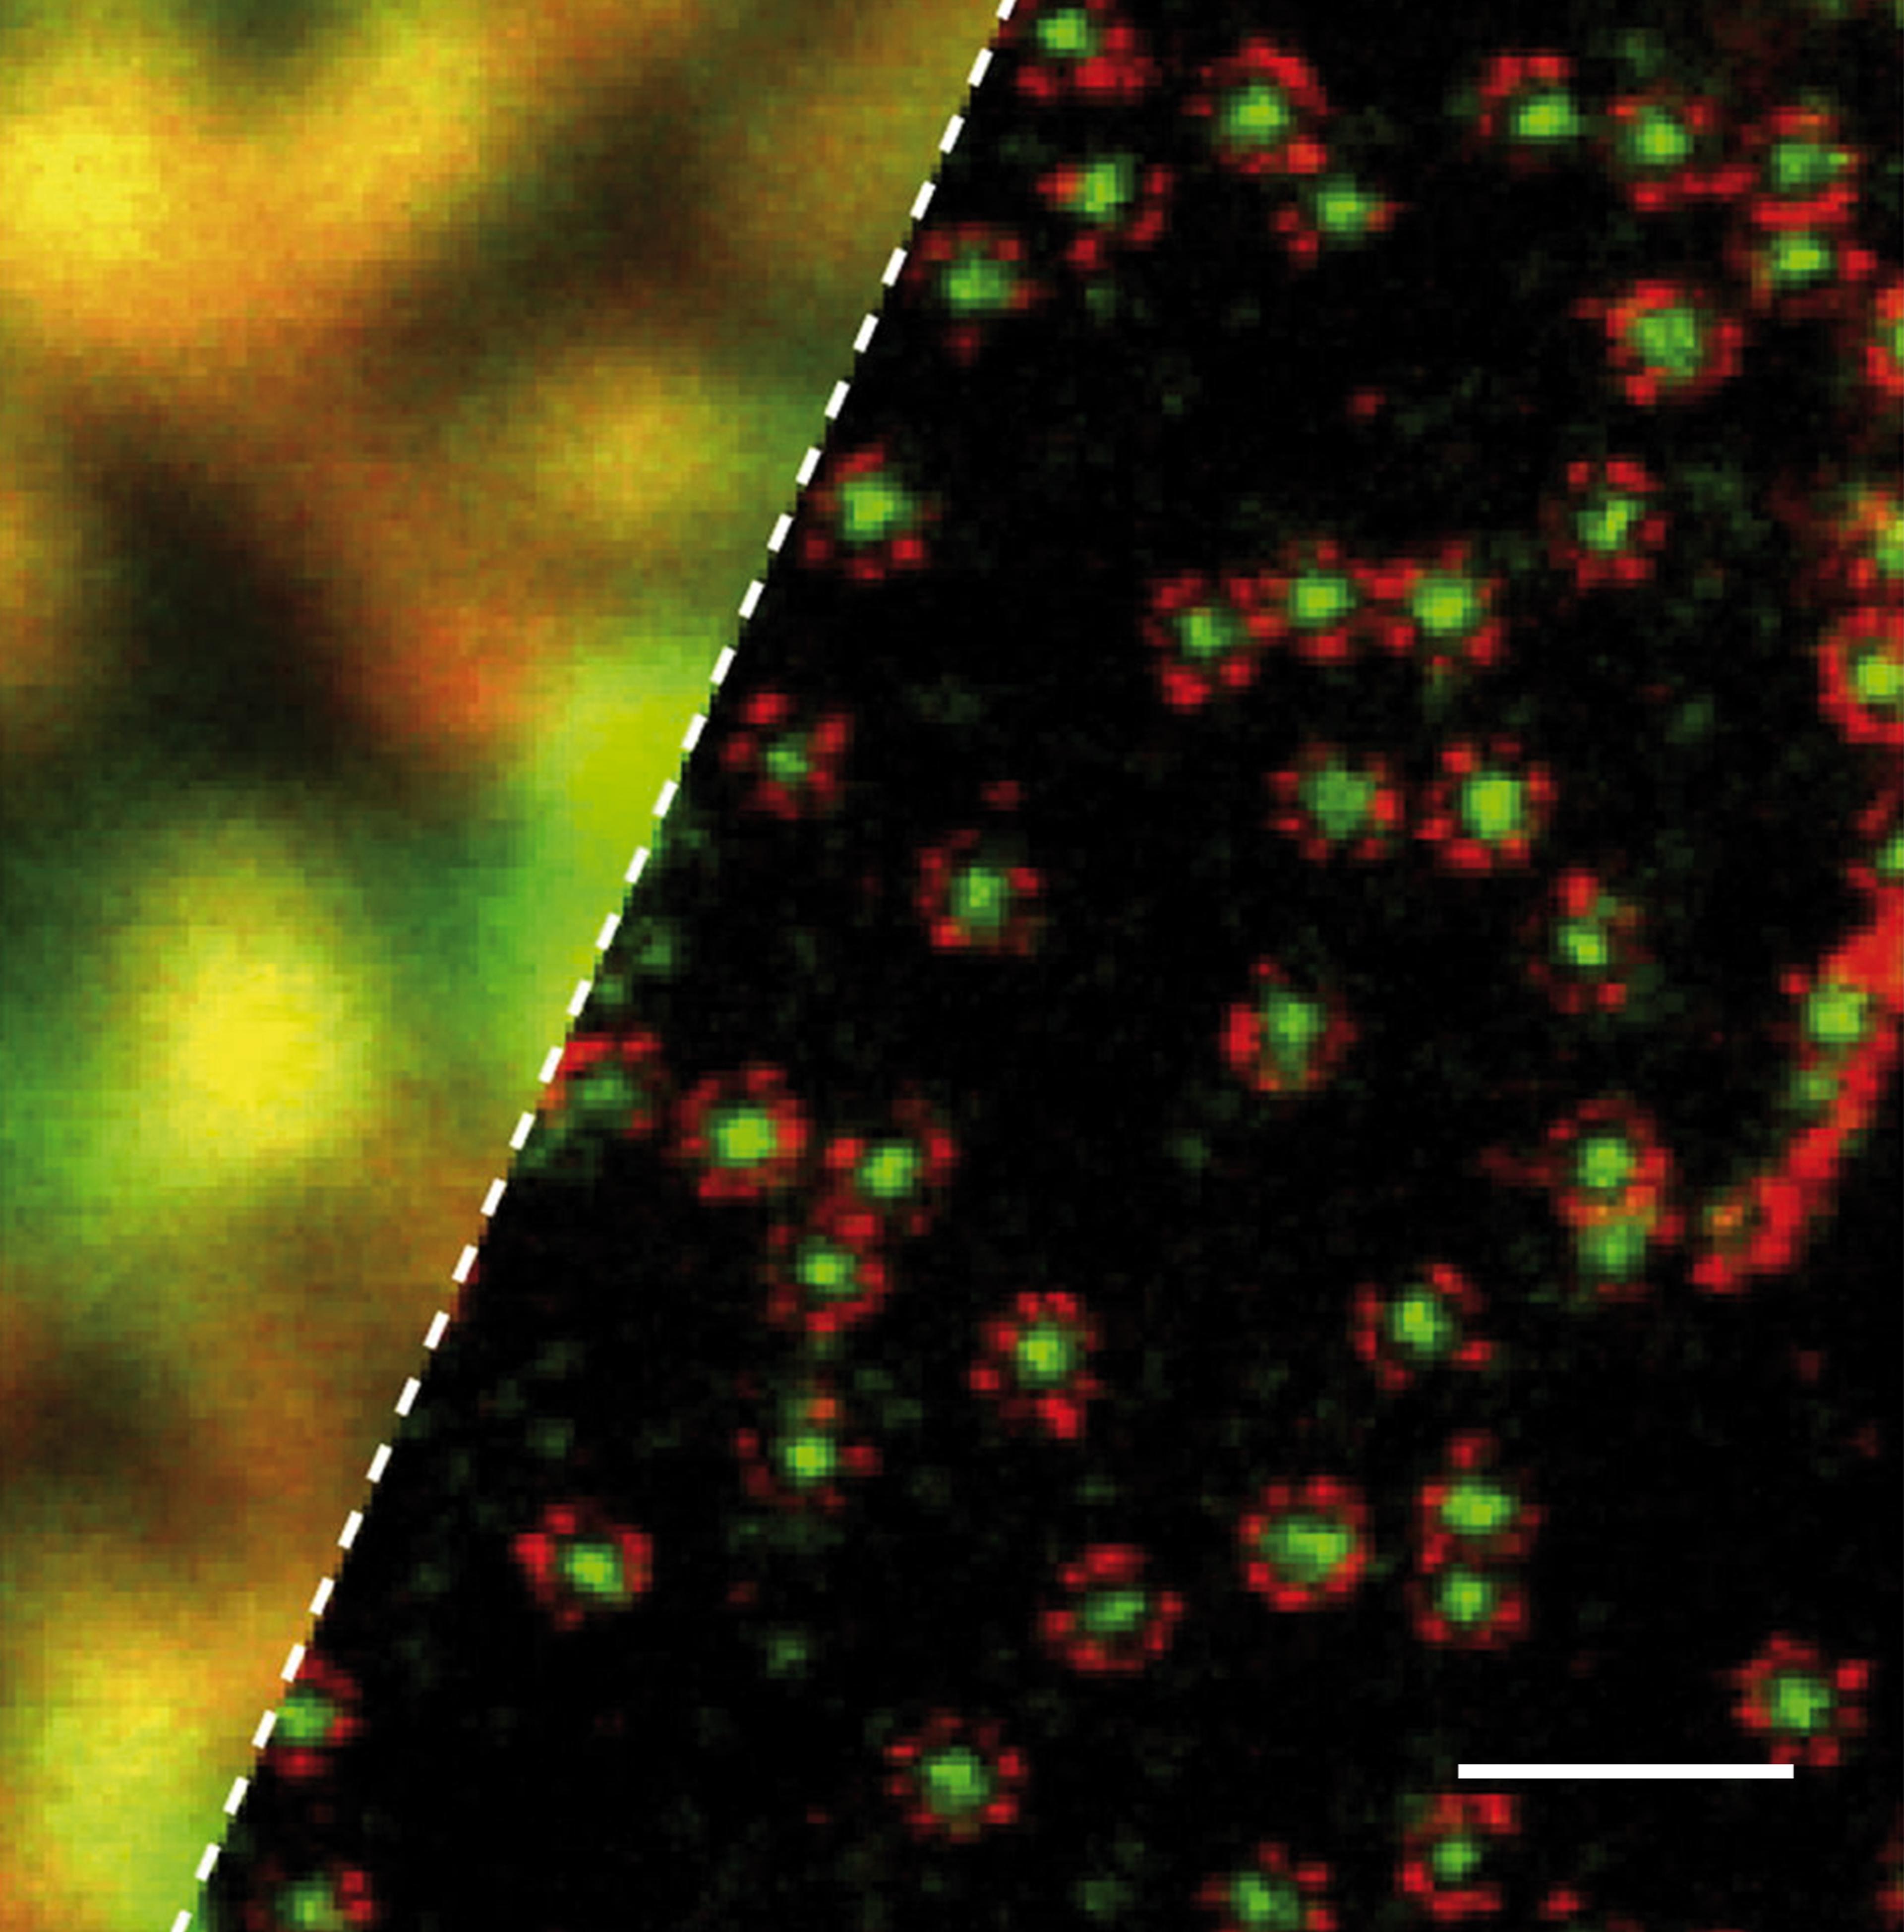 STED microscopy image of protein complexes (right), revealing a much higher resolution than conventional confocal microscopy (left)